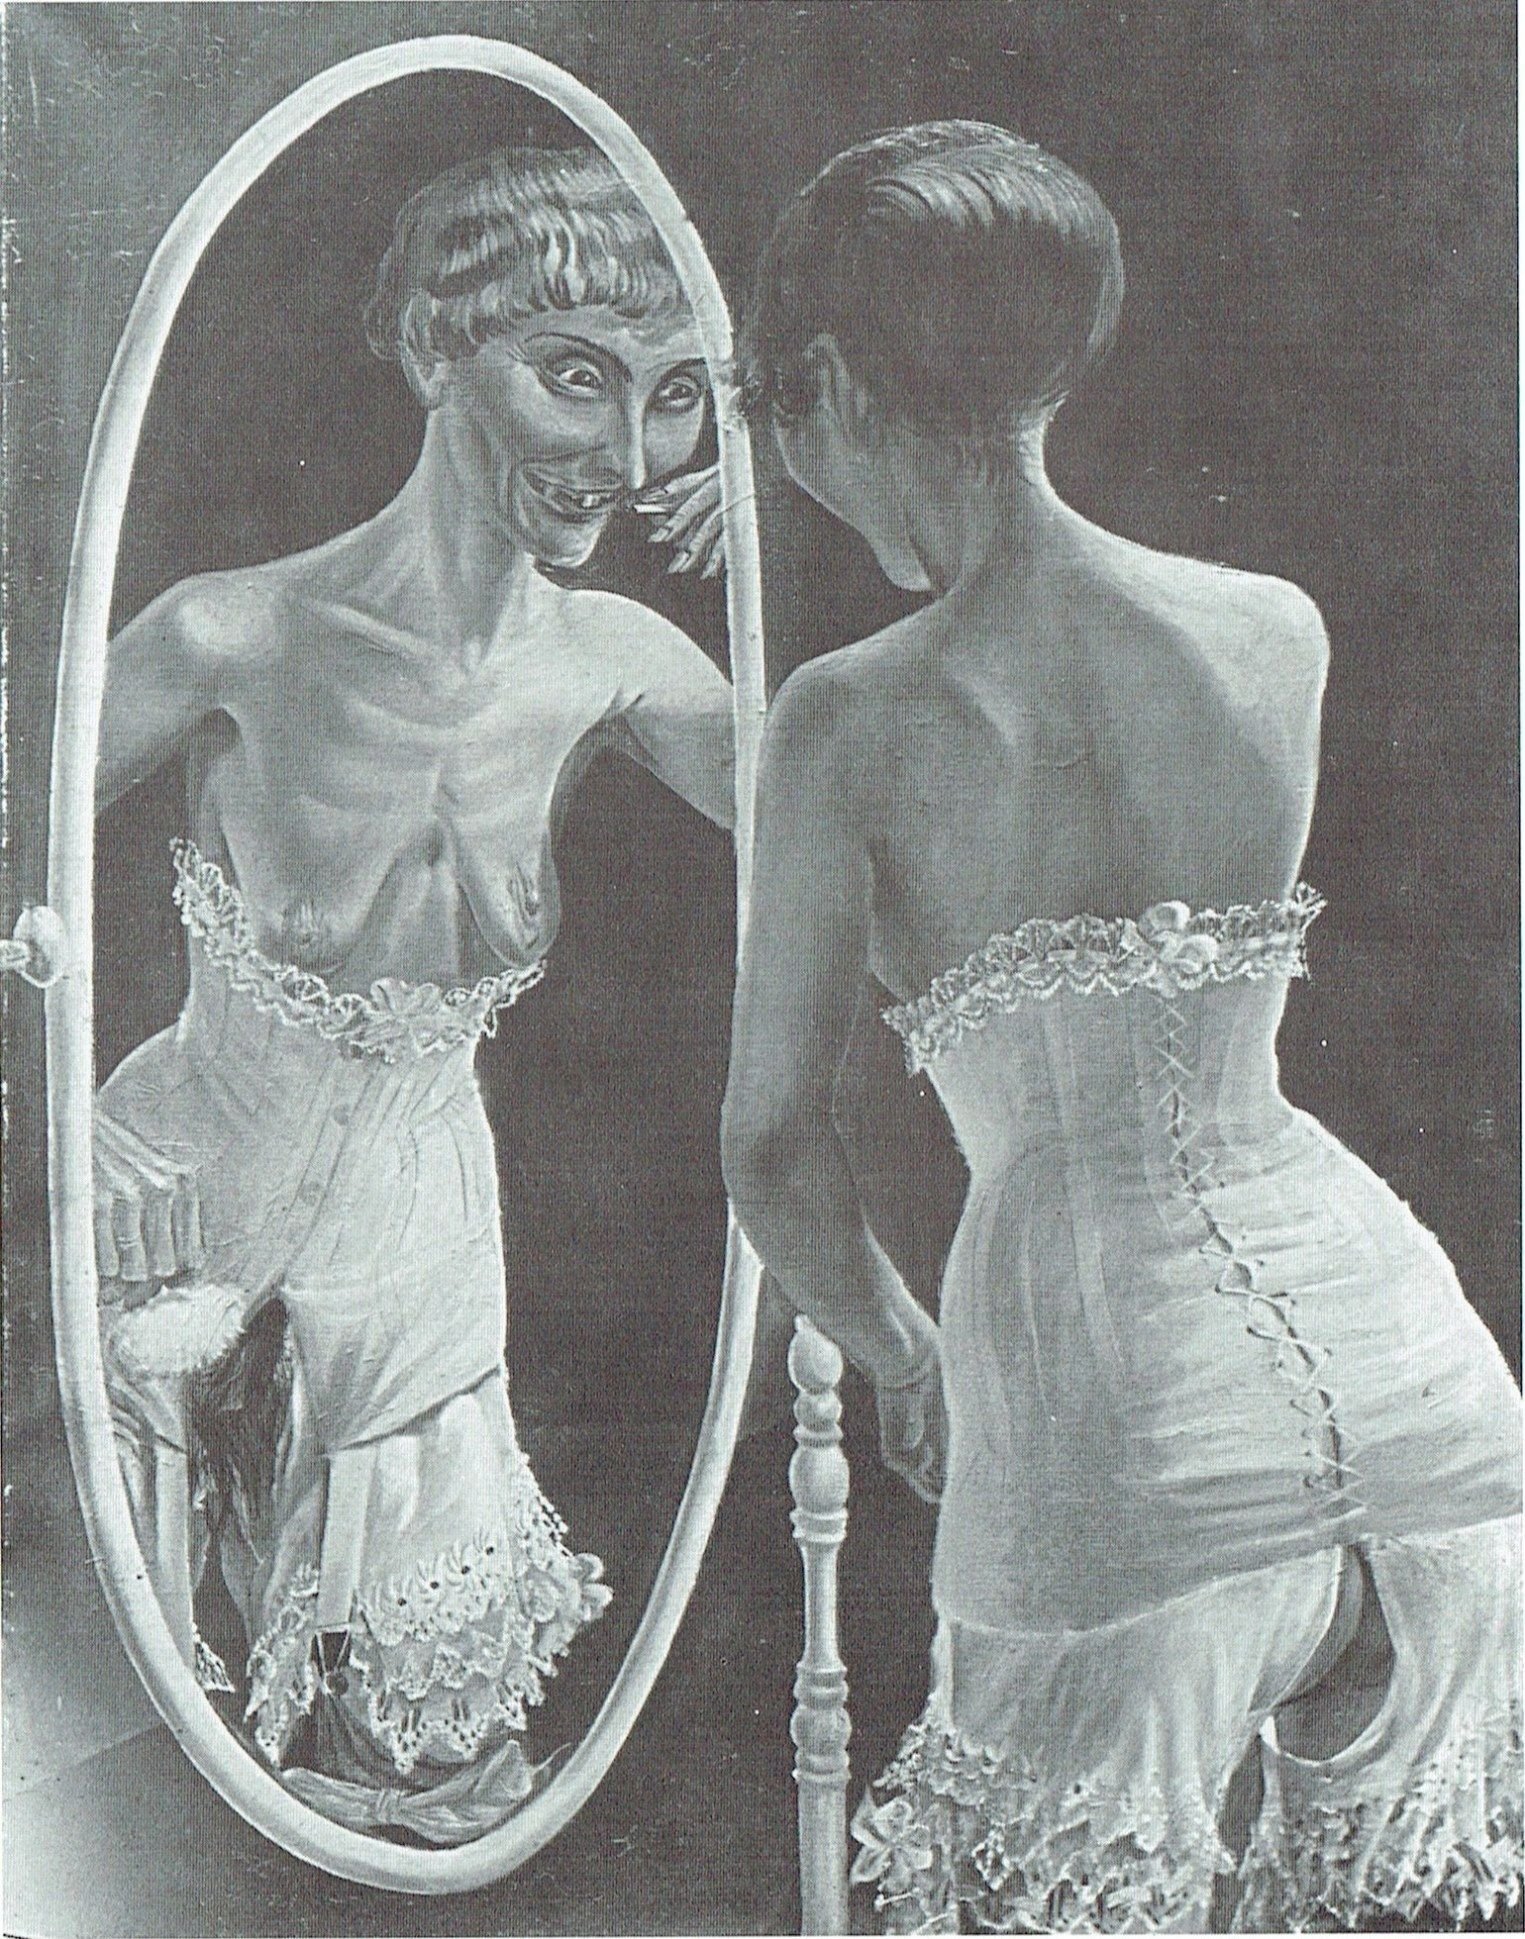 Otto Dix’s painting Girl In Front of the Mirror (1921)